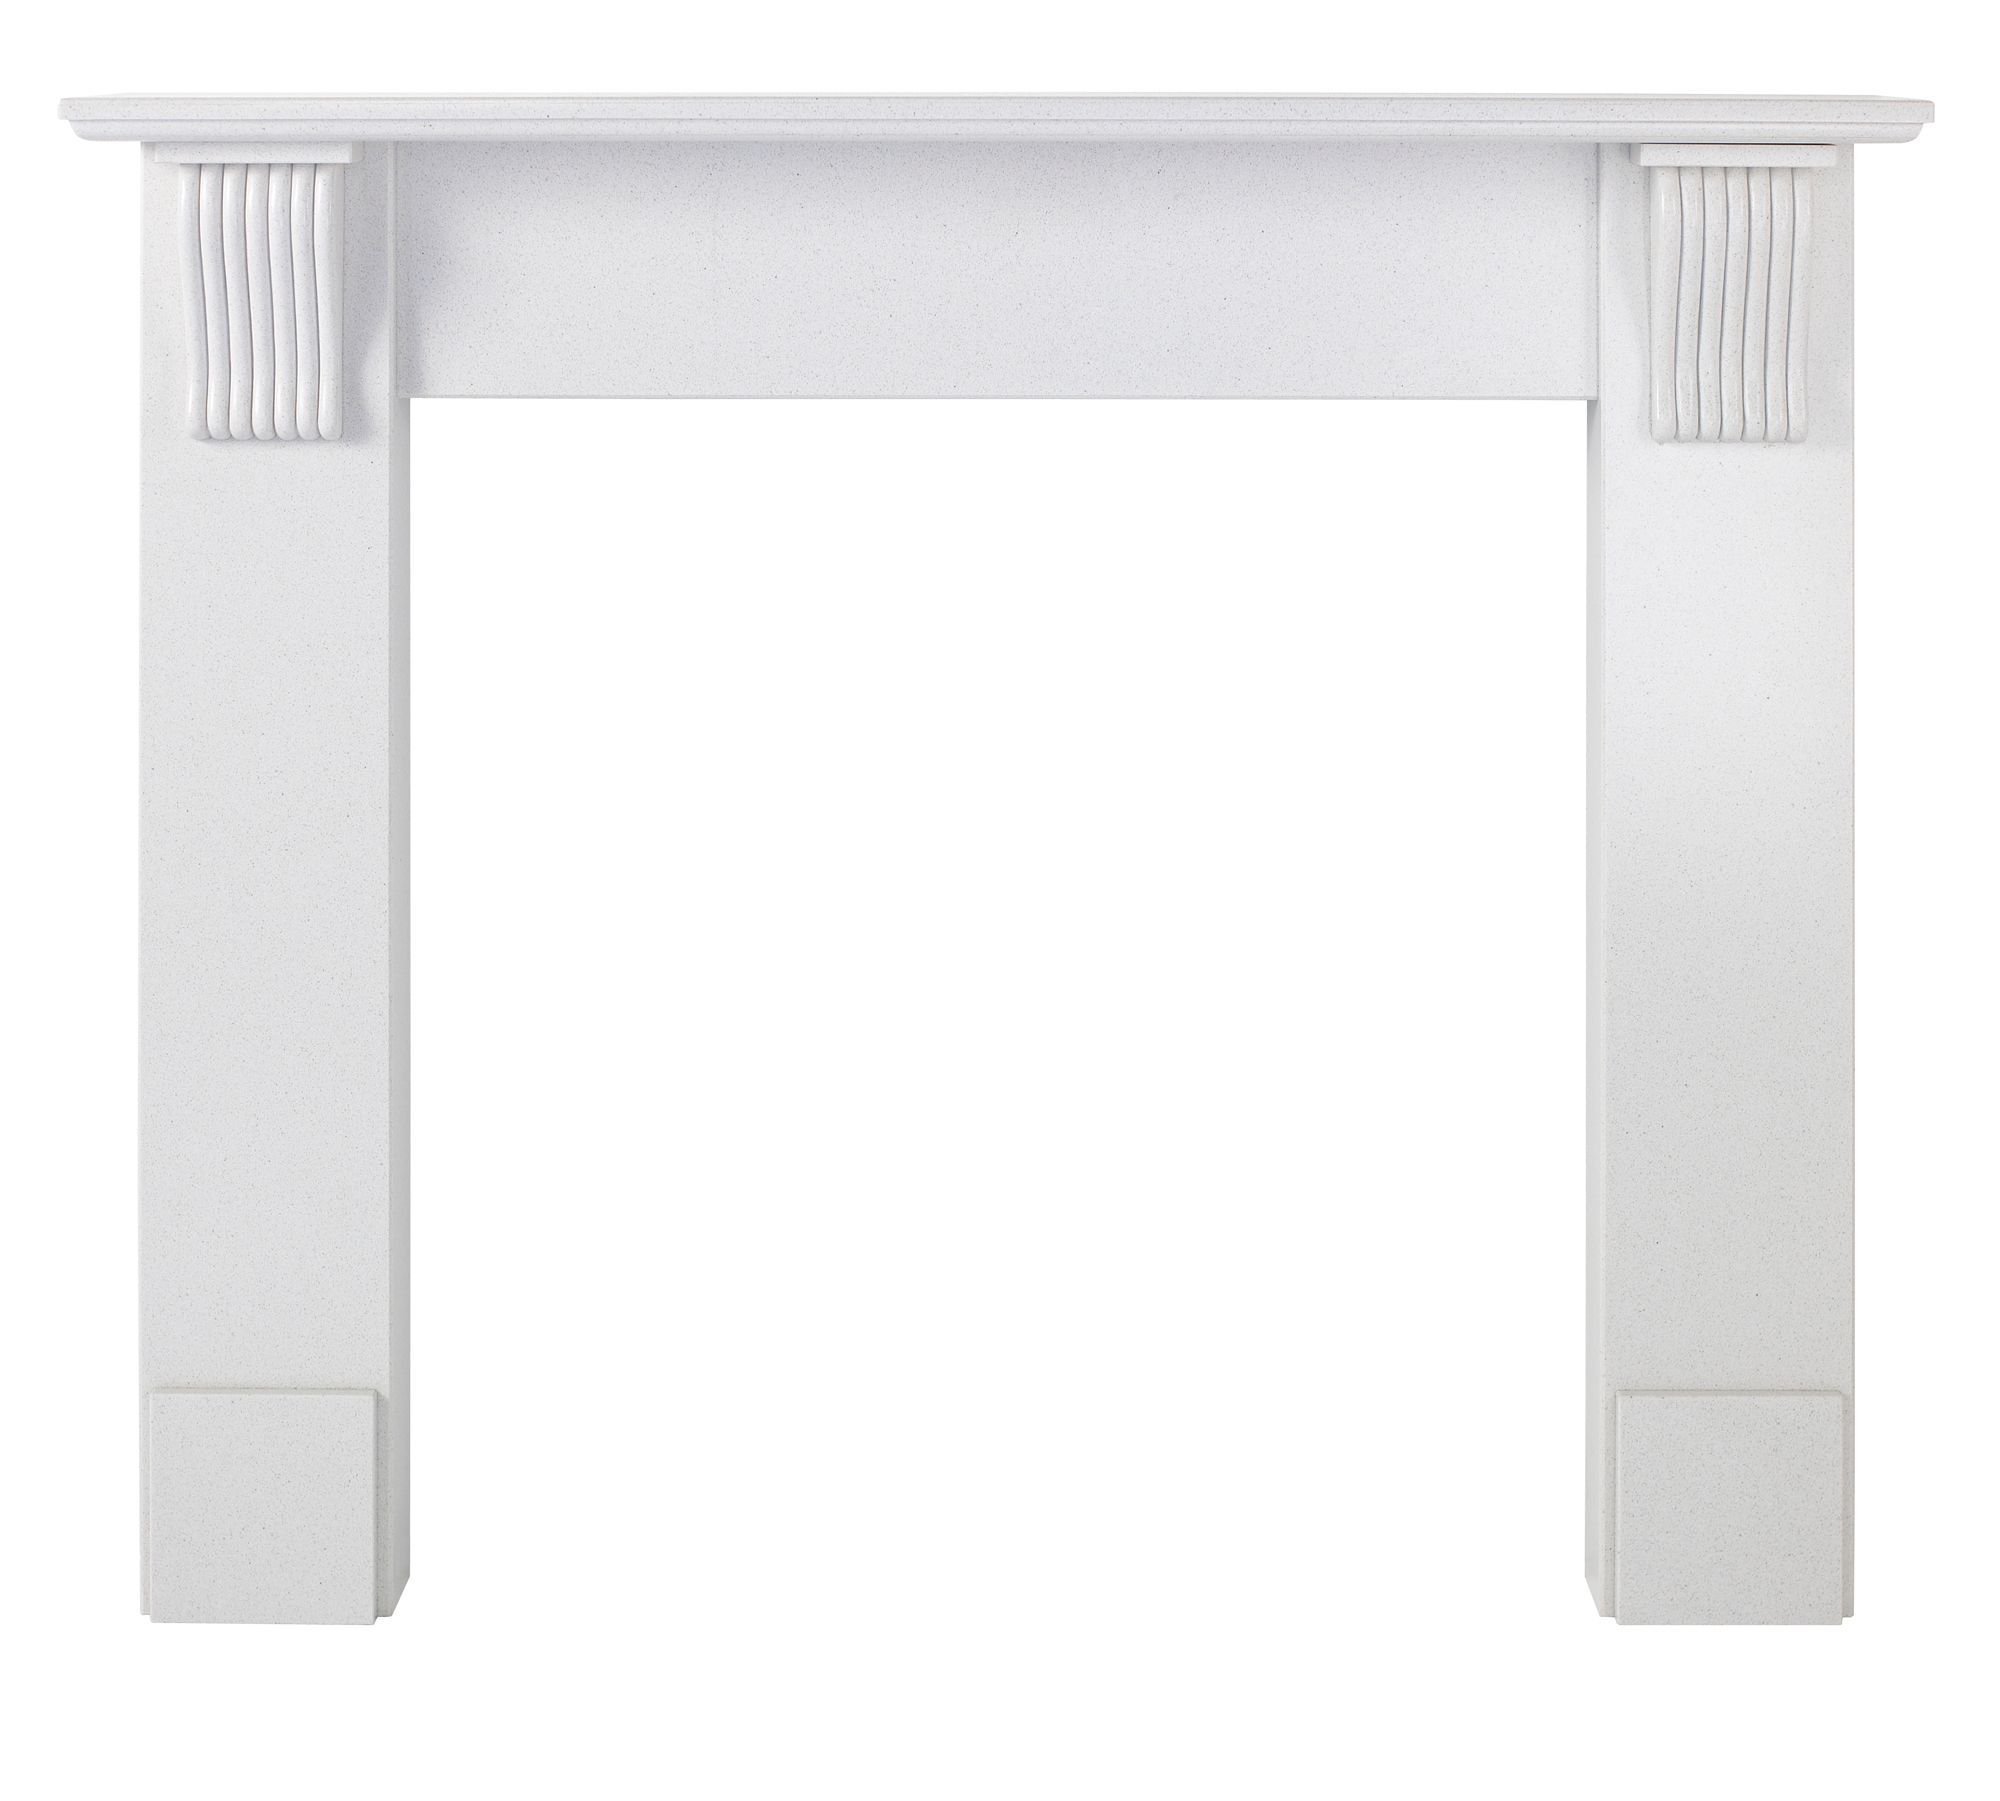 Valor Sotherby White Fire Surround